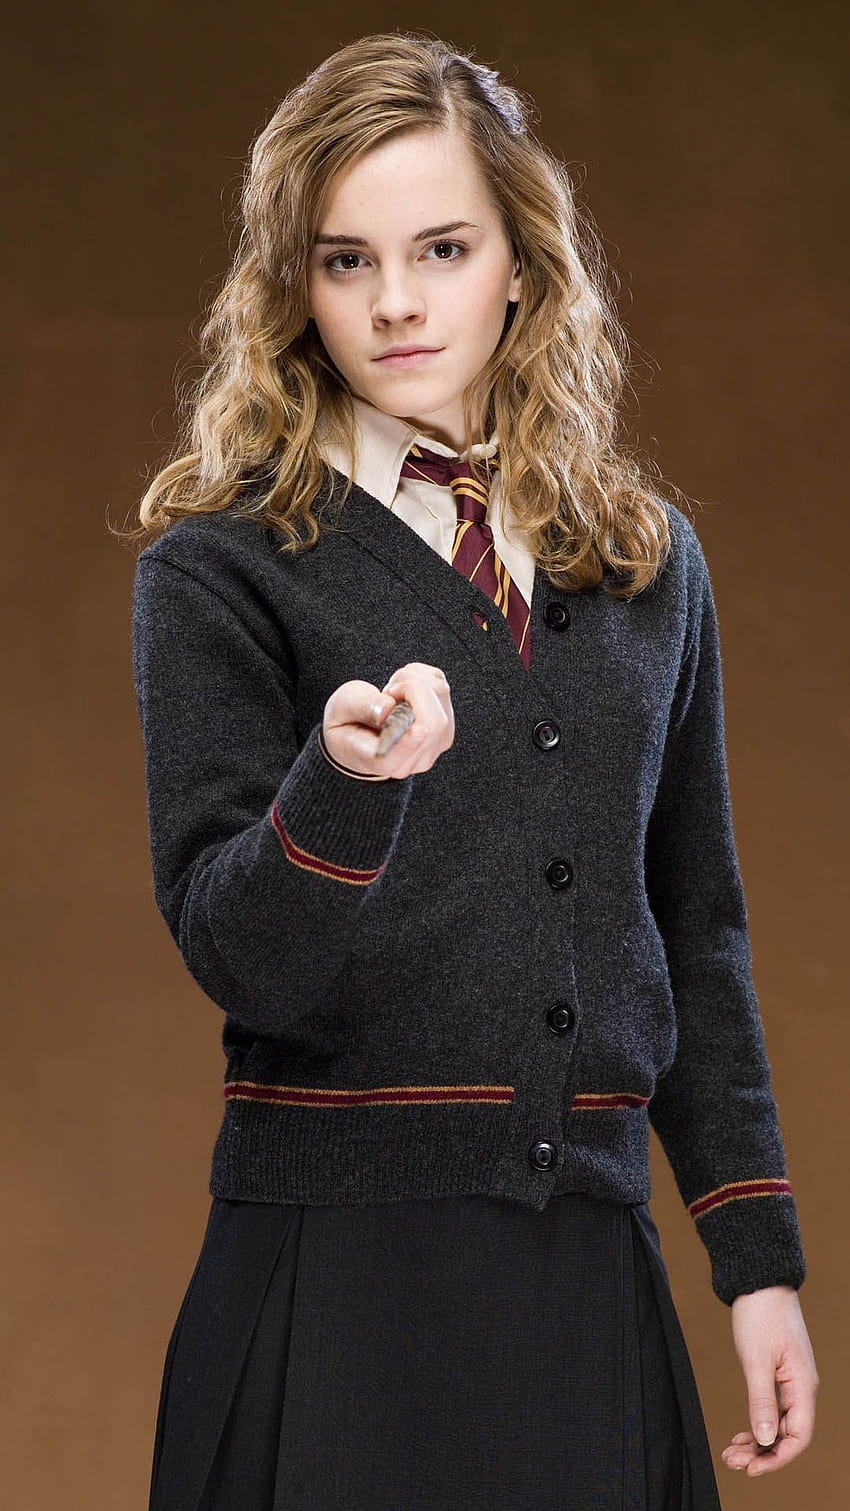 Young Hermione Granger on Dog, harry potter and hermione granger ...